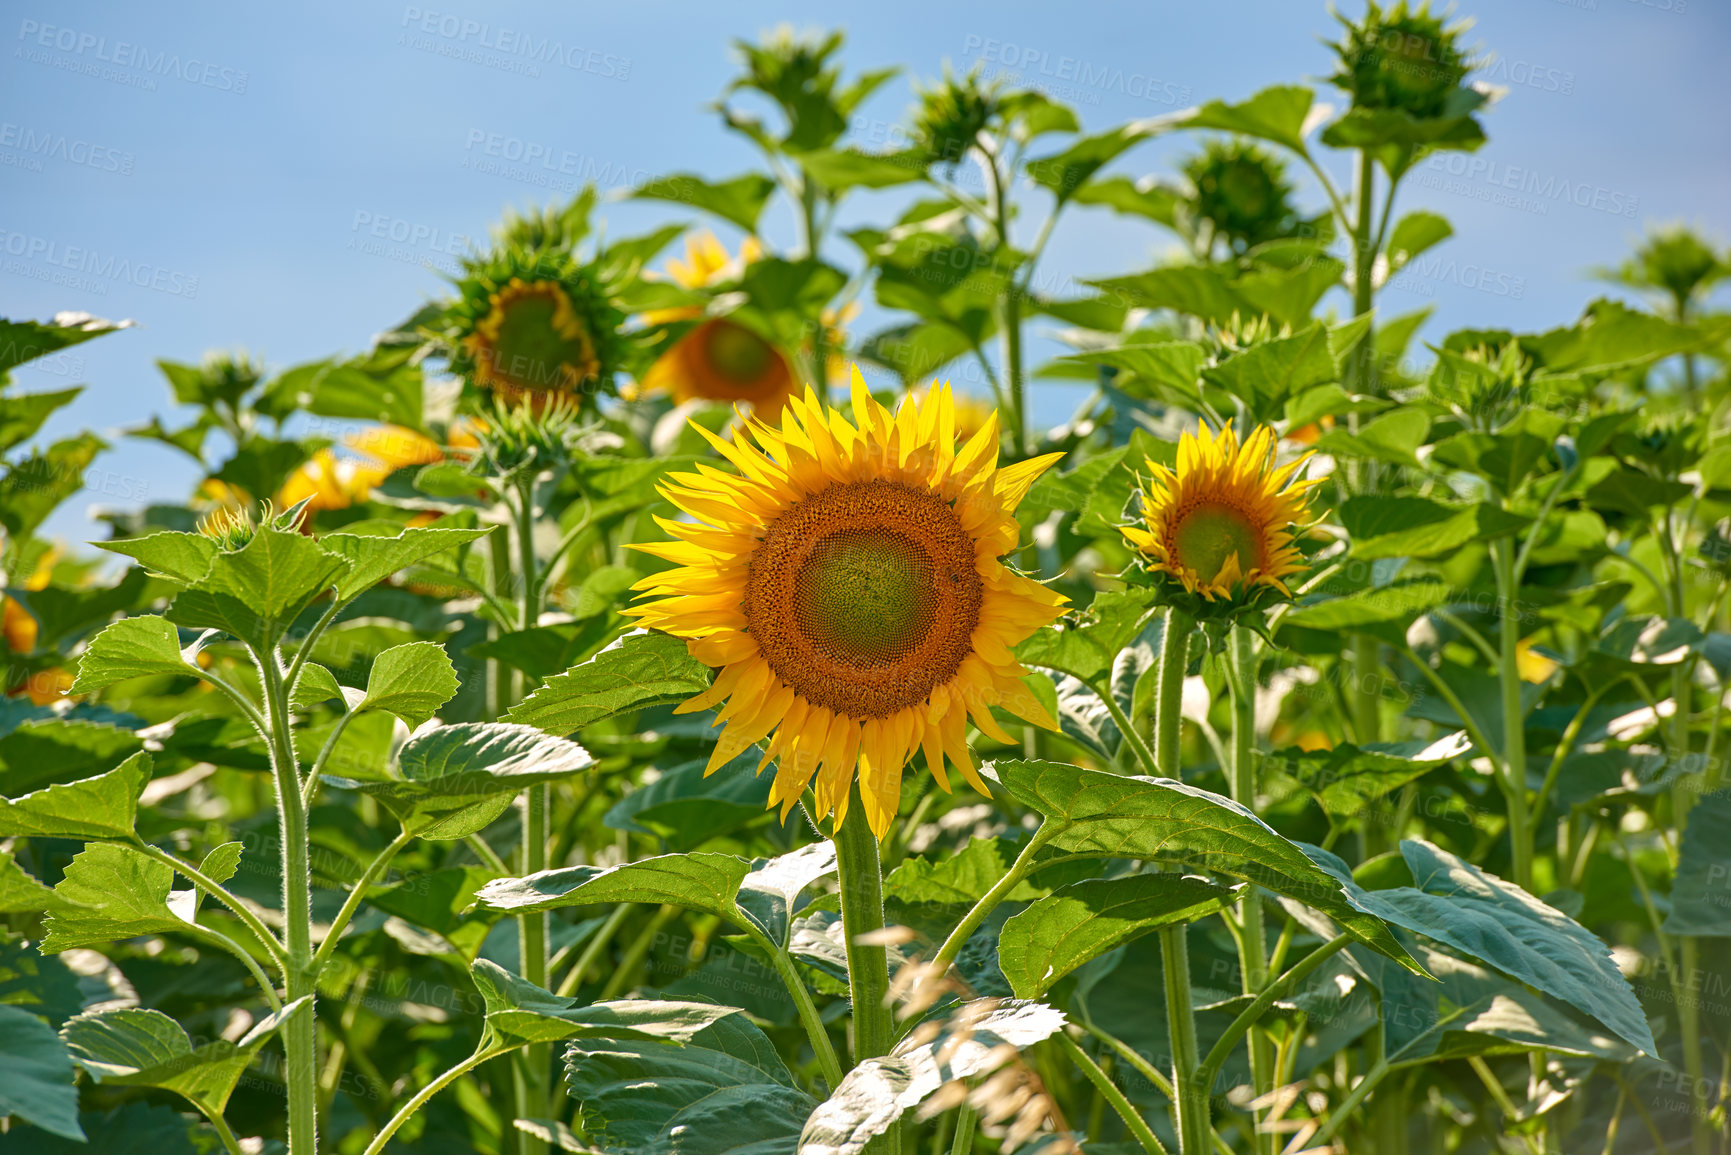 Buy stock photo Sunflowers growing in a garden or field against a blue sky background in summer. Agriculture farming of oilseed plants used to produce cooking oil. Bright flora blossoming in a meadow on a sunny day